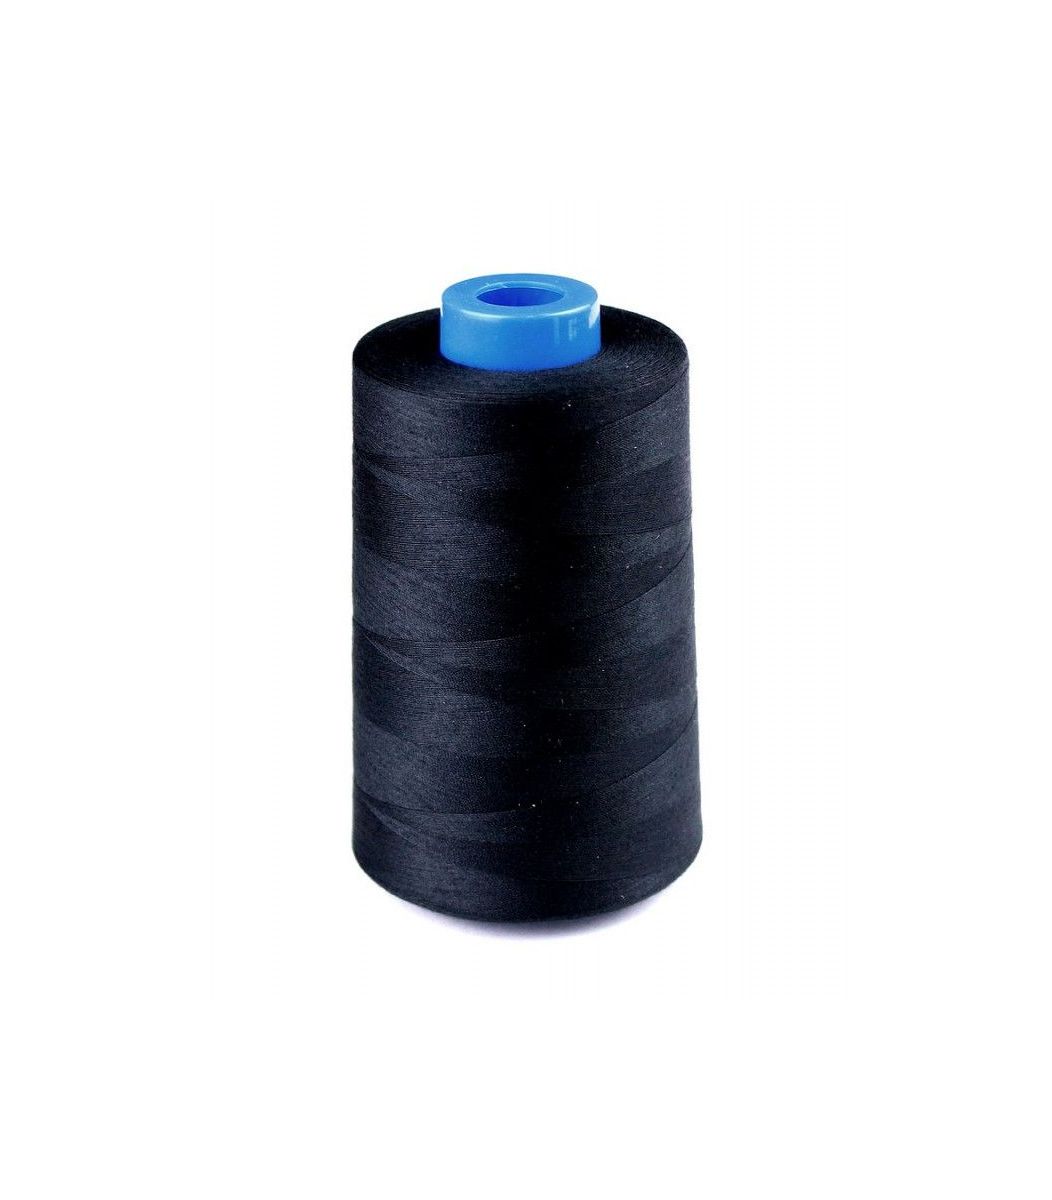  Sewing Threads  Thread Cotton, Professional Sewing NM-60/2-1